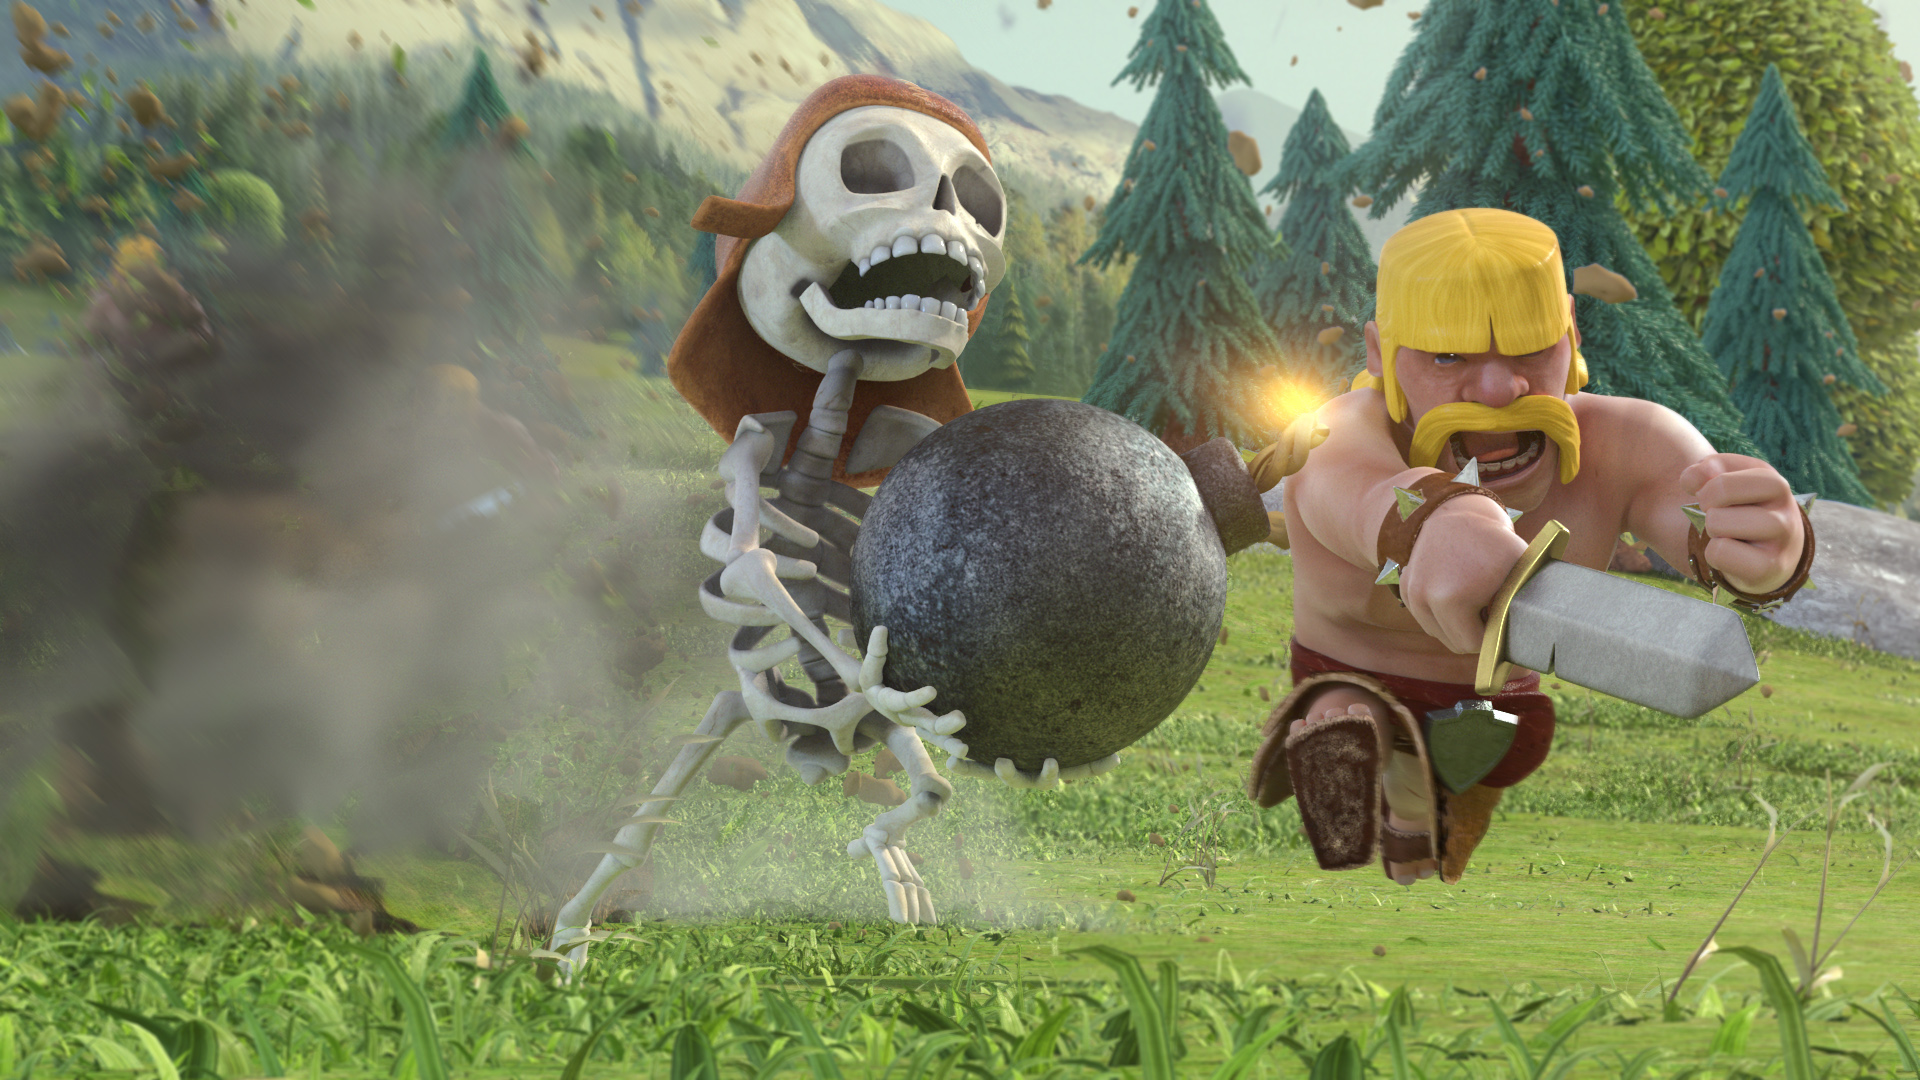 Clash Of Clans Wallpapers And Photos 4K Full HD Everest Hill 